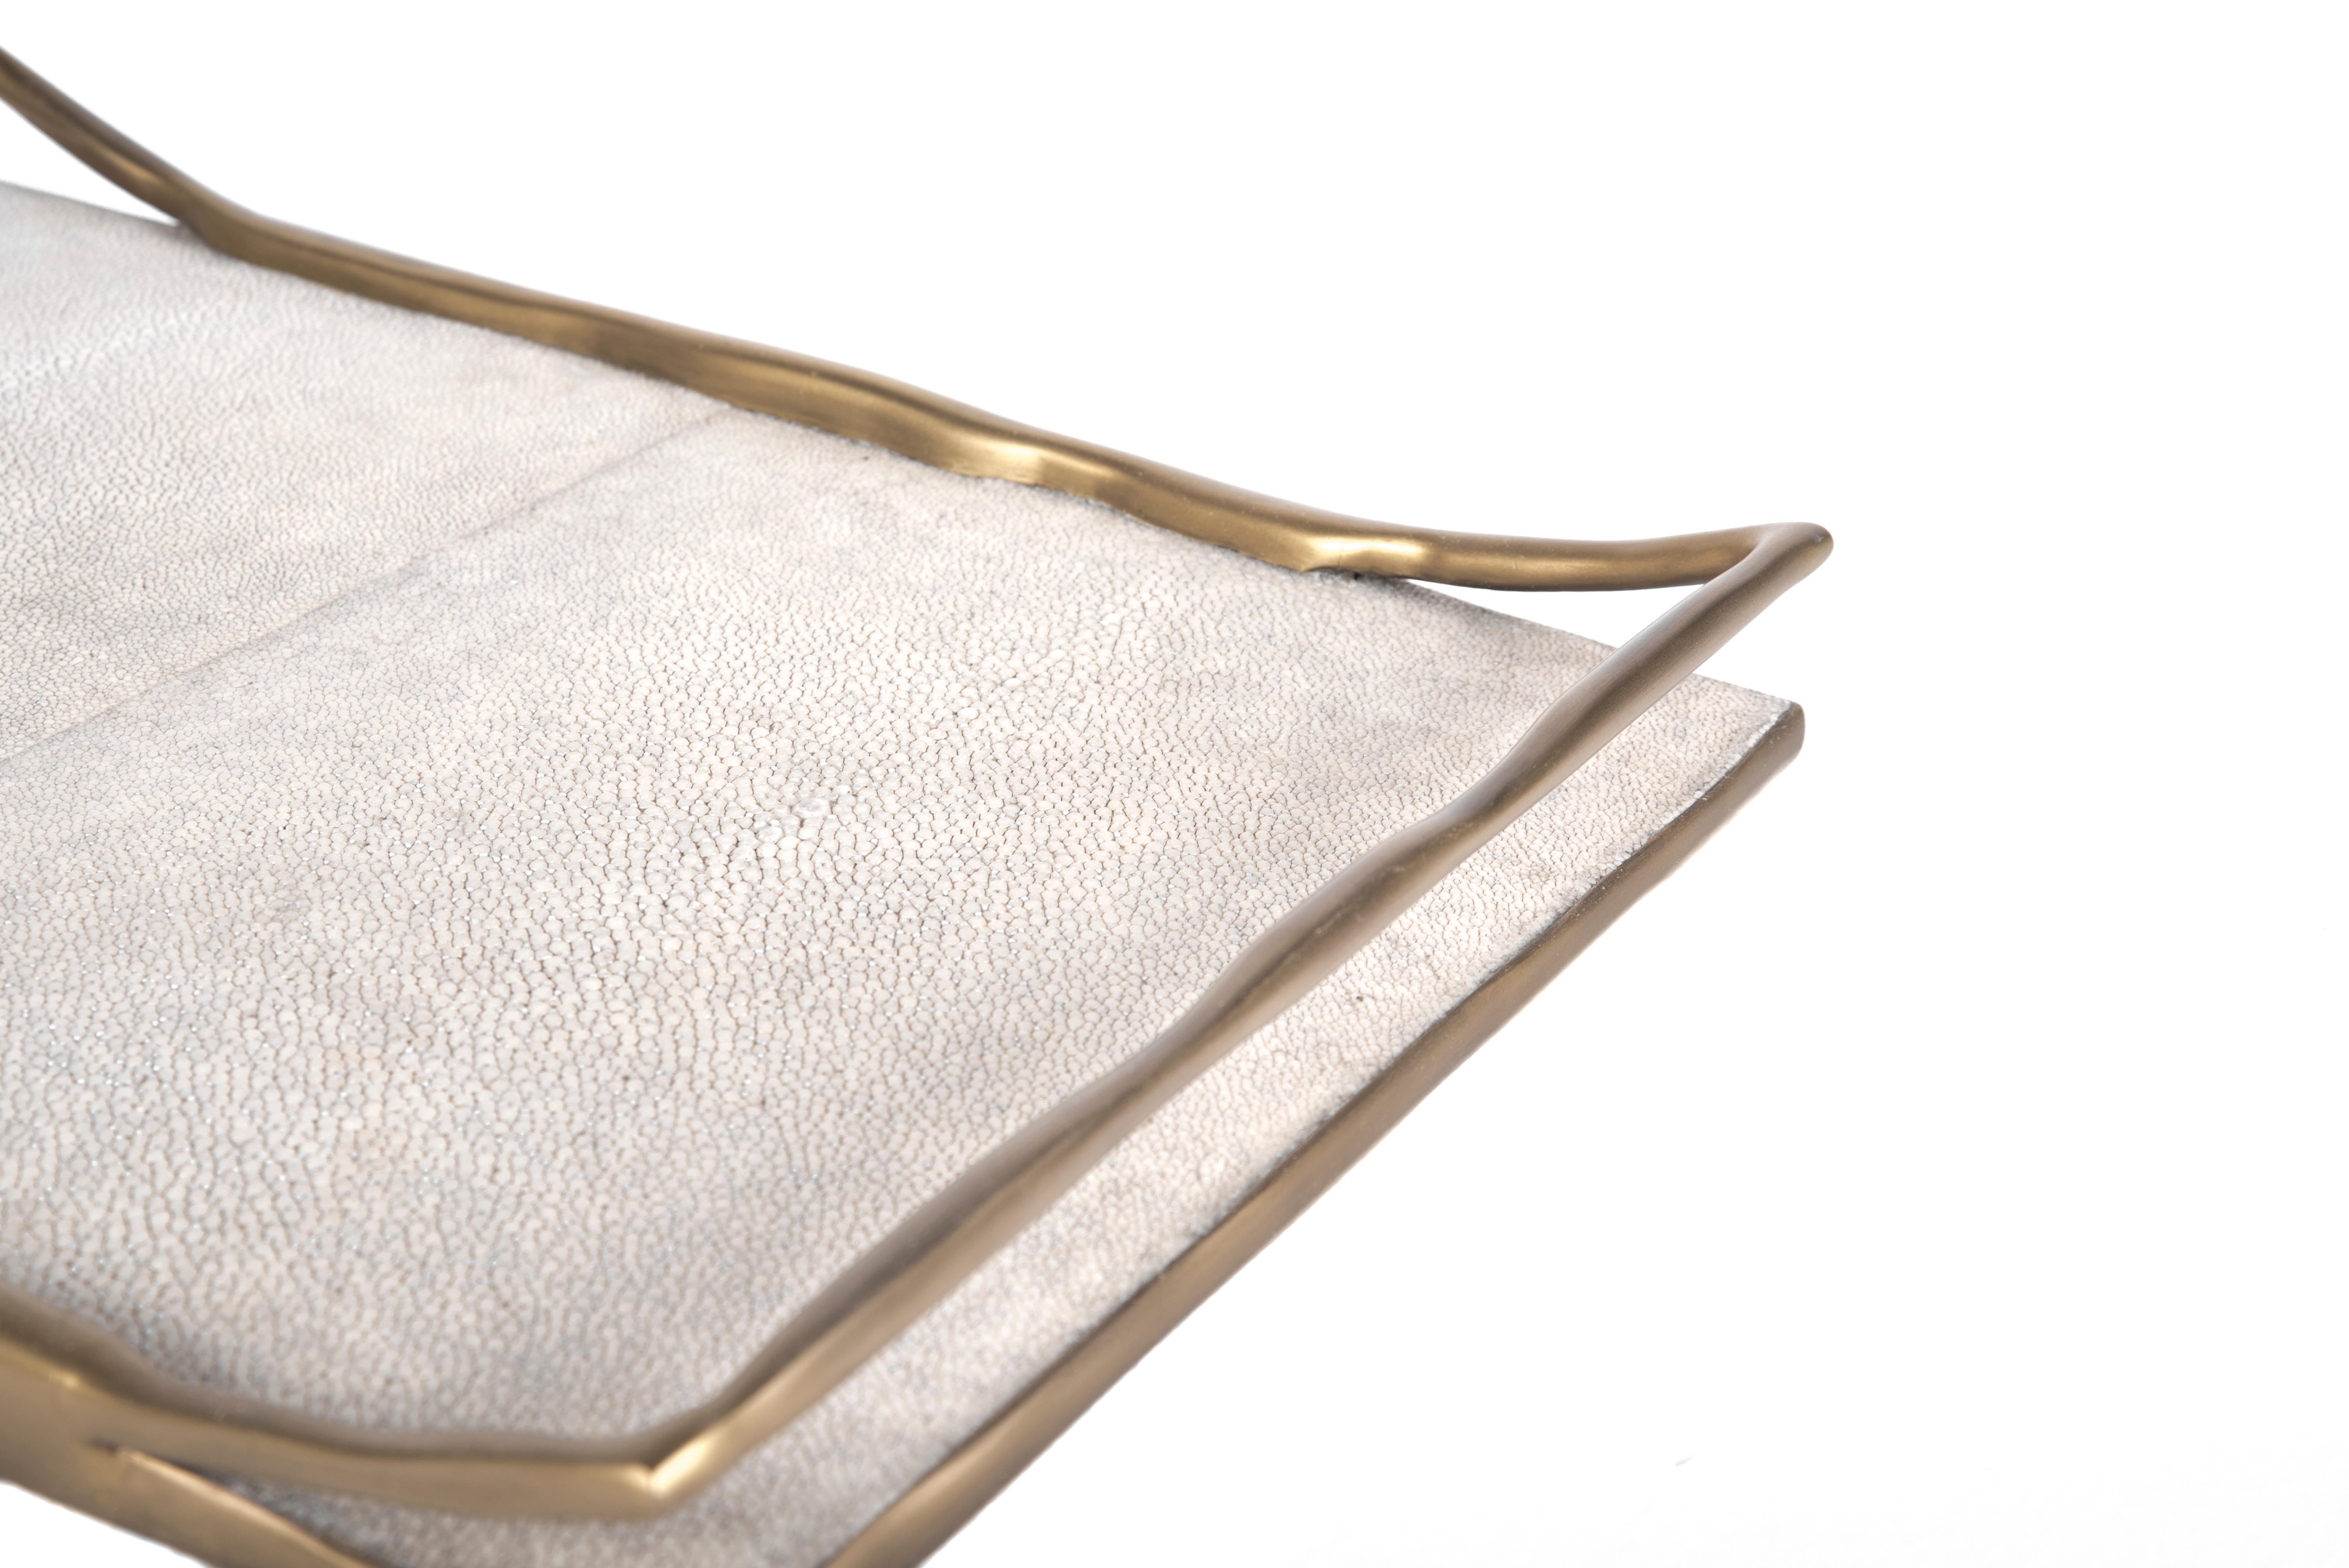 The melting tray comes in two sizes and two color variants. This listing is for the medium size in cream shagreen. The irregular surfaced bronze-patina brass handles, frame the tray in a beautiful & sculptural way.

Measures: Large 58.5 x 34.5 x